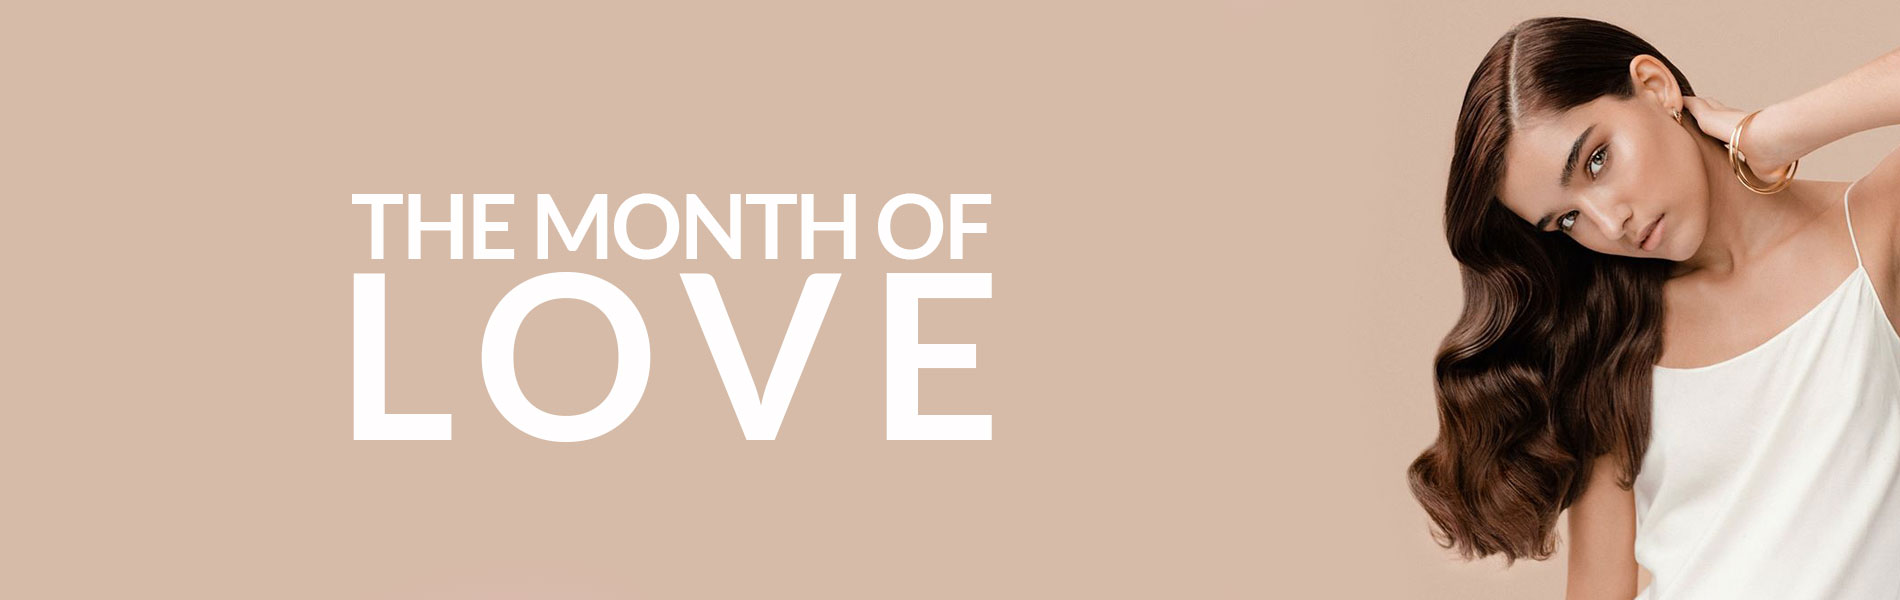 the month of love banner 2